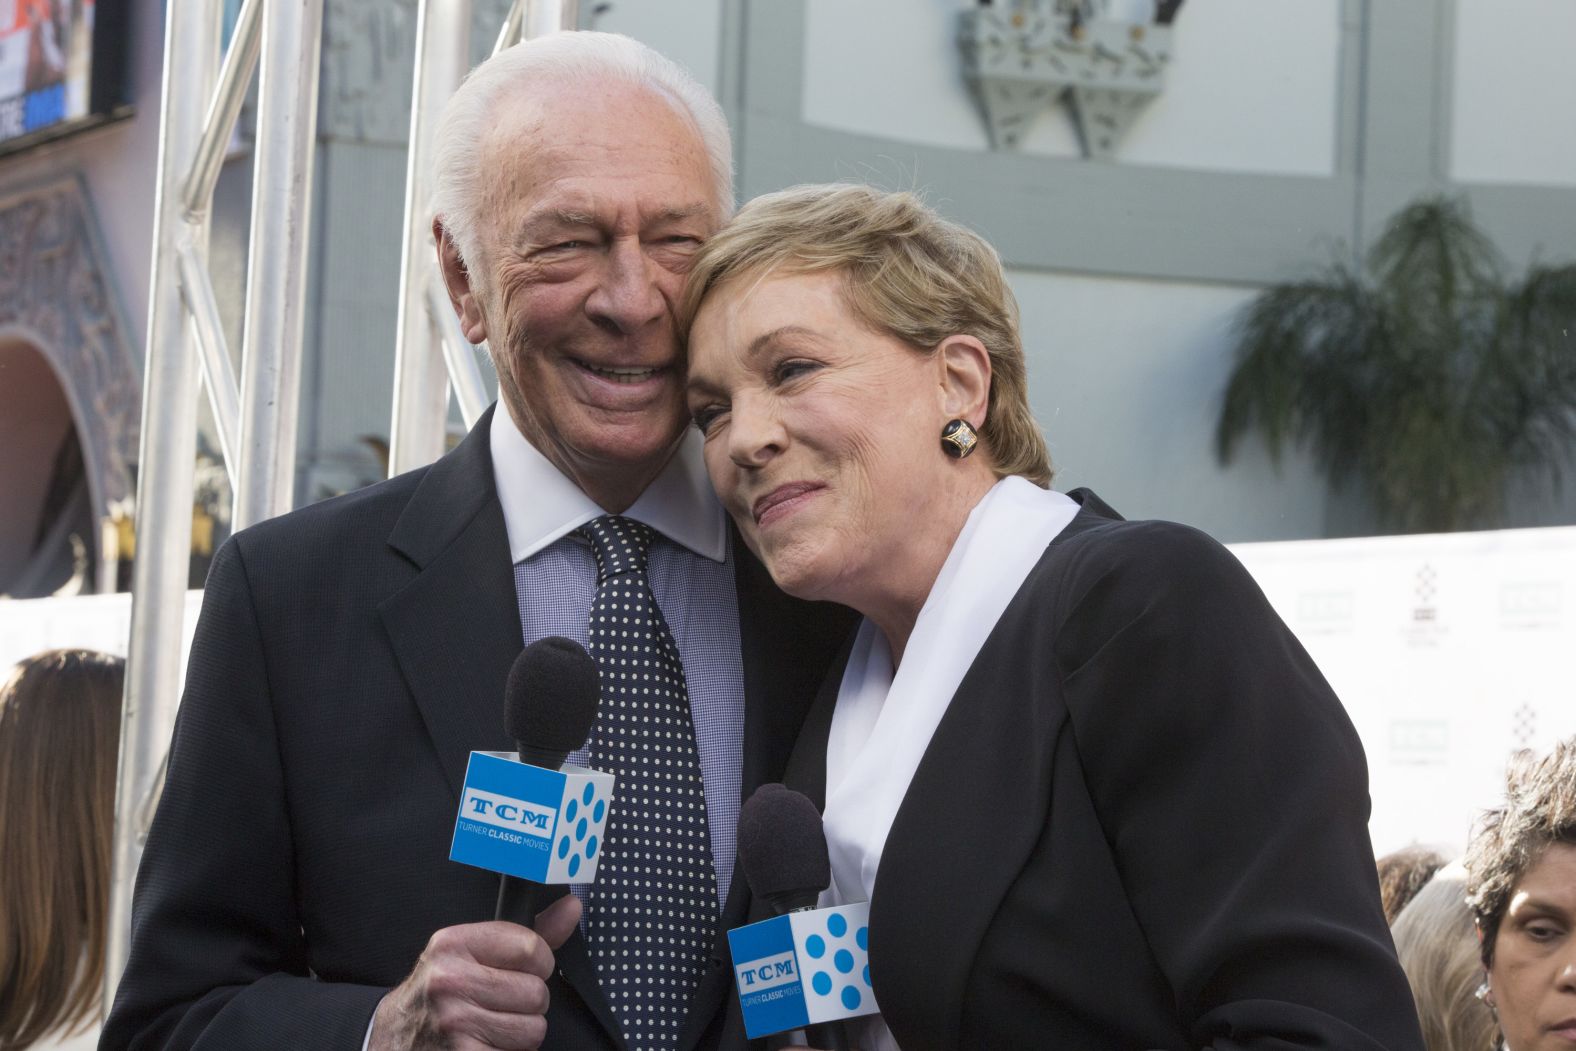 Plummer and his former "Sound of Music" co-star Julie Andrews arrive at a TCM Classic Film Festival in 2015.